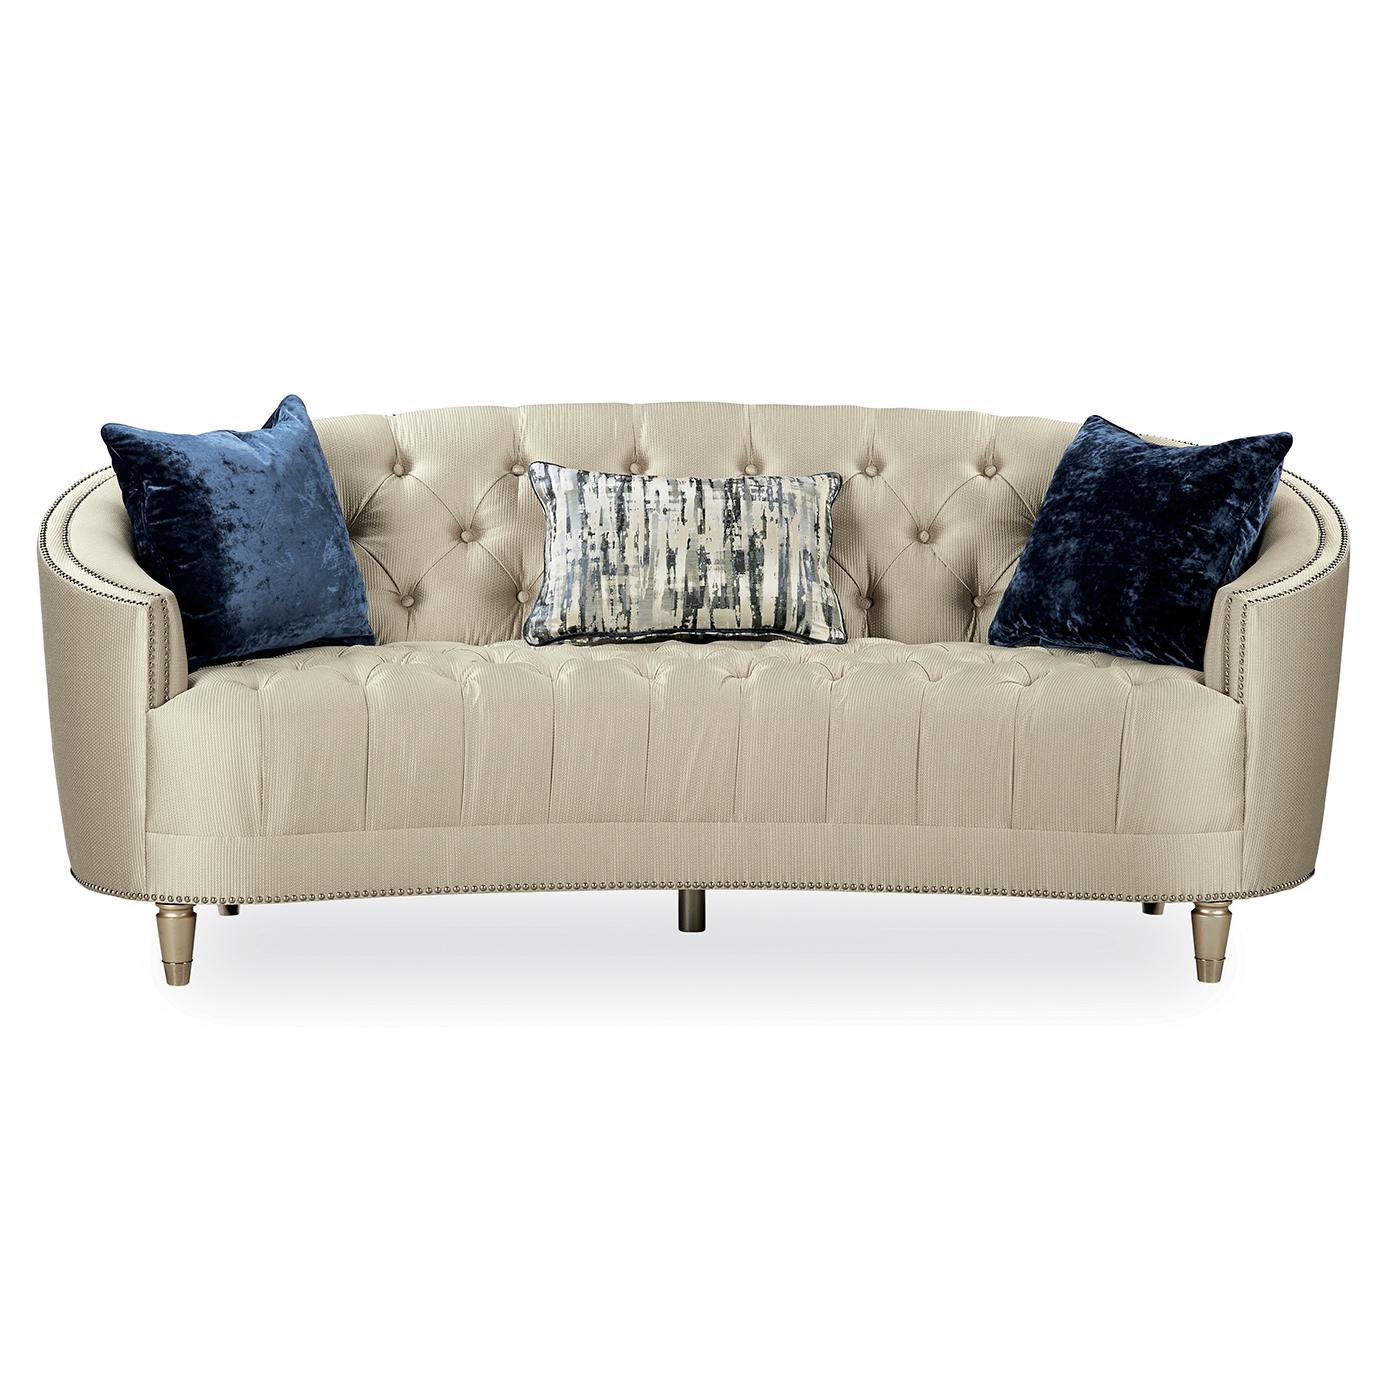 A transitional tufted curved back bench seat sofa. Curvaceous and shapely, with traditional elements like button-tufting and decorative nailhead trim, this bench seat sofa also conveys a modern sensibility, with metallic accents on the pillows. An